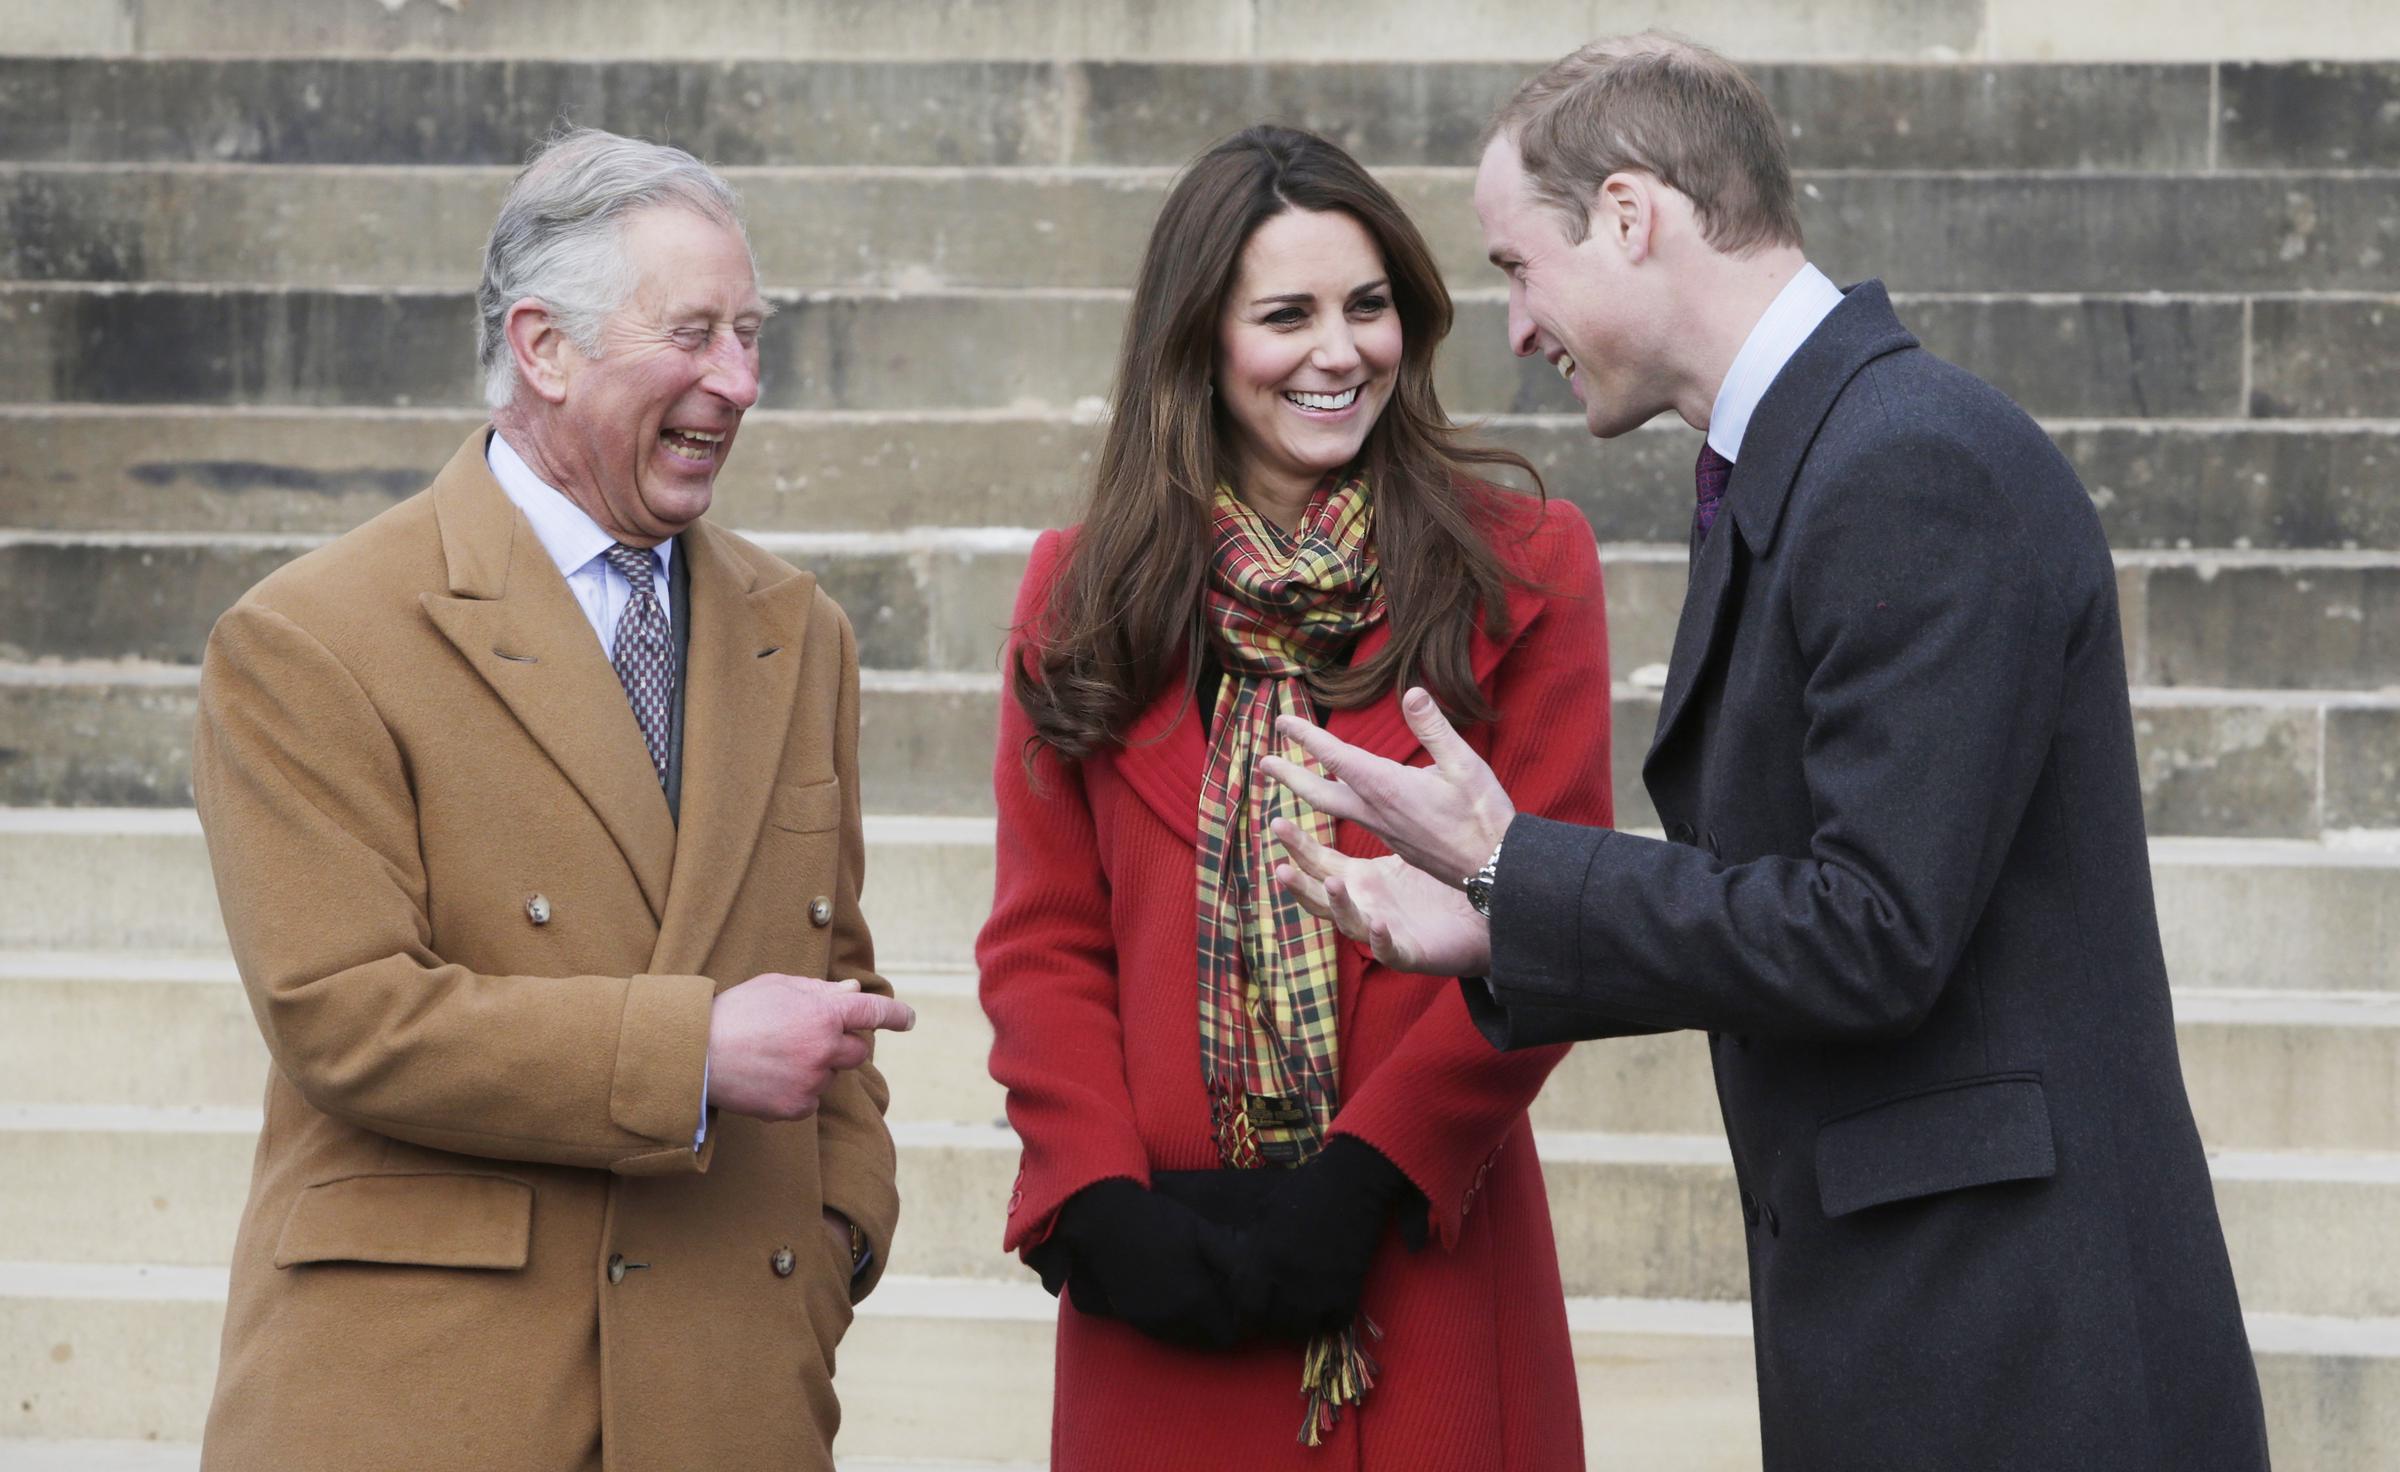 King Charles III, Kate Middleton and Prince William during during a visit to Dumfries House in Ayrshire, Scotland on March 5, 2013 | Source: Getty Images